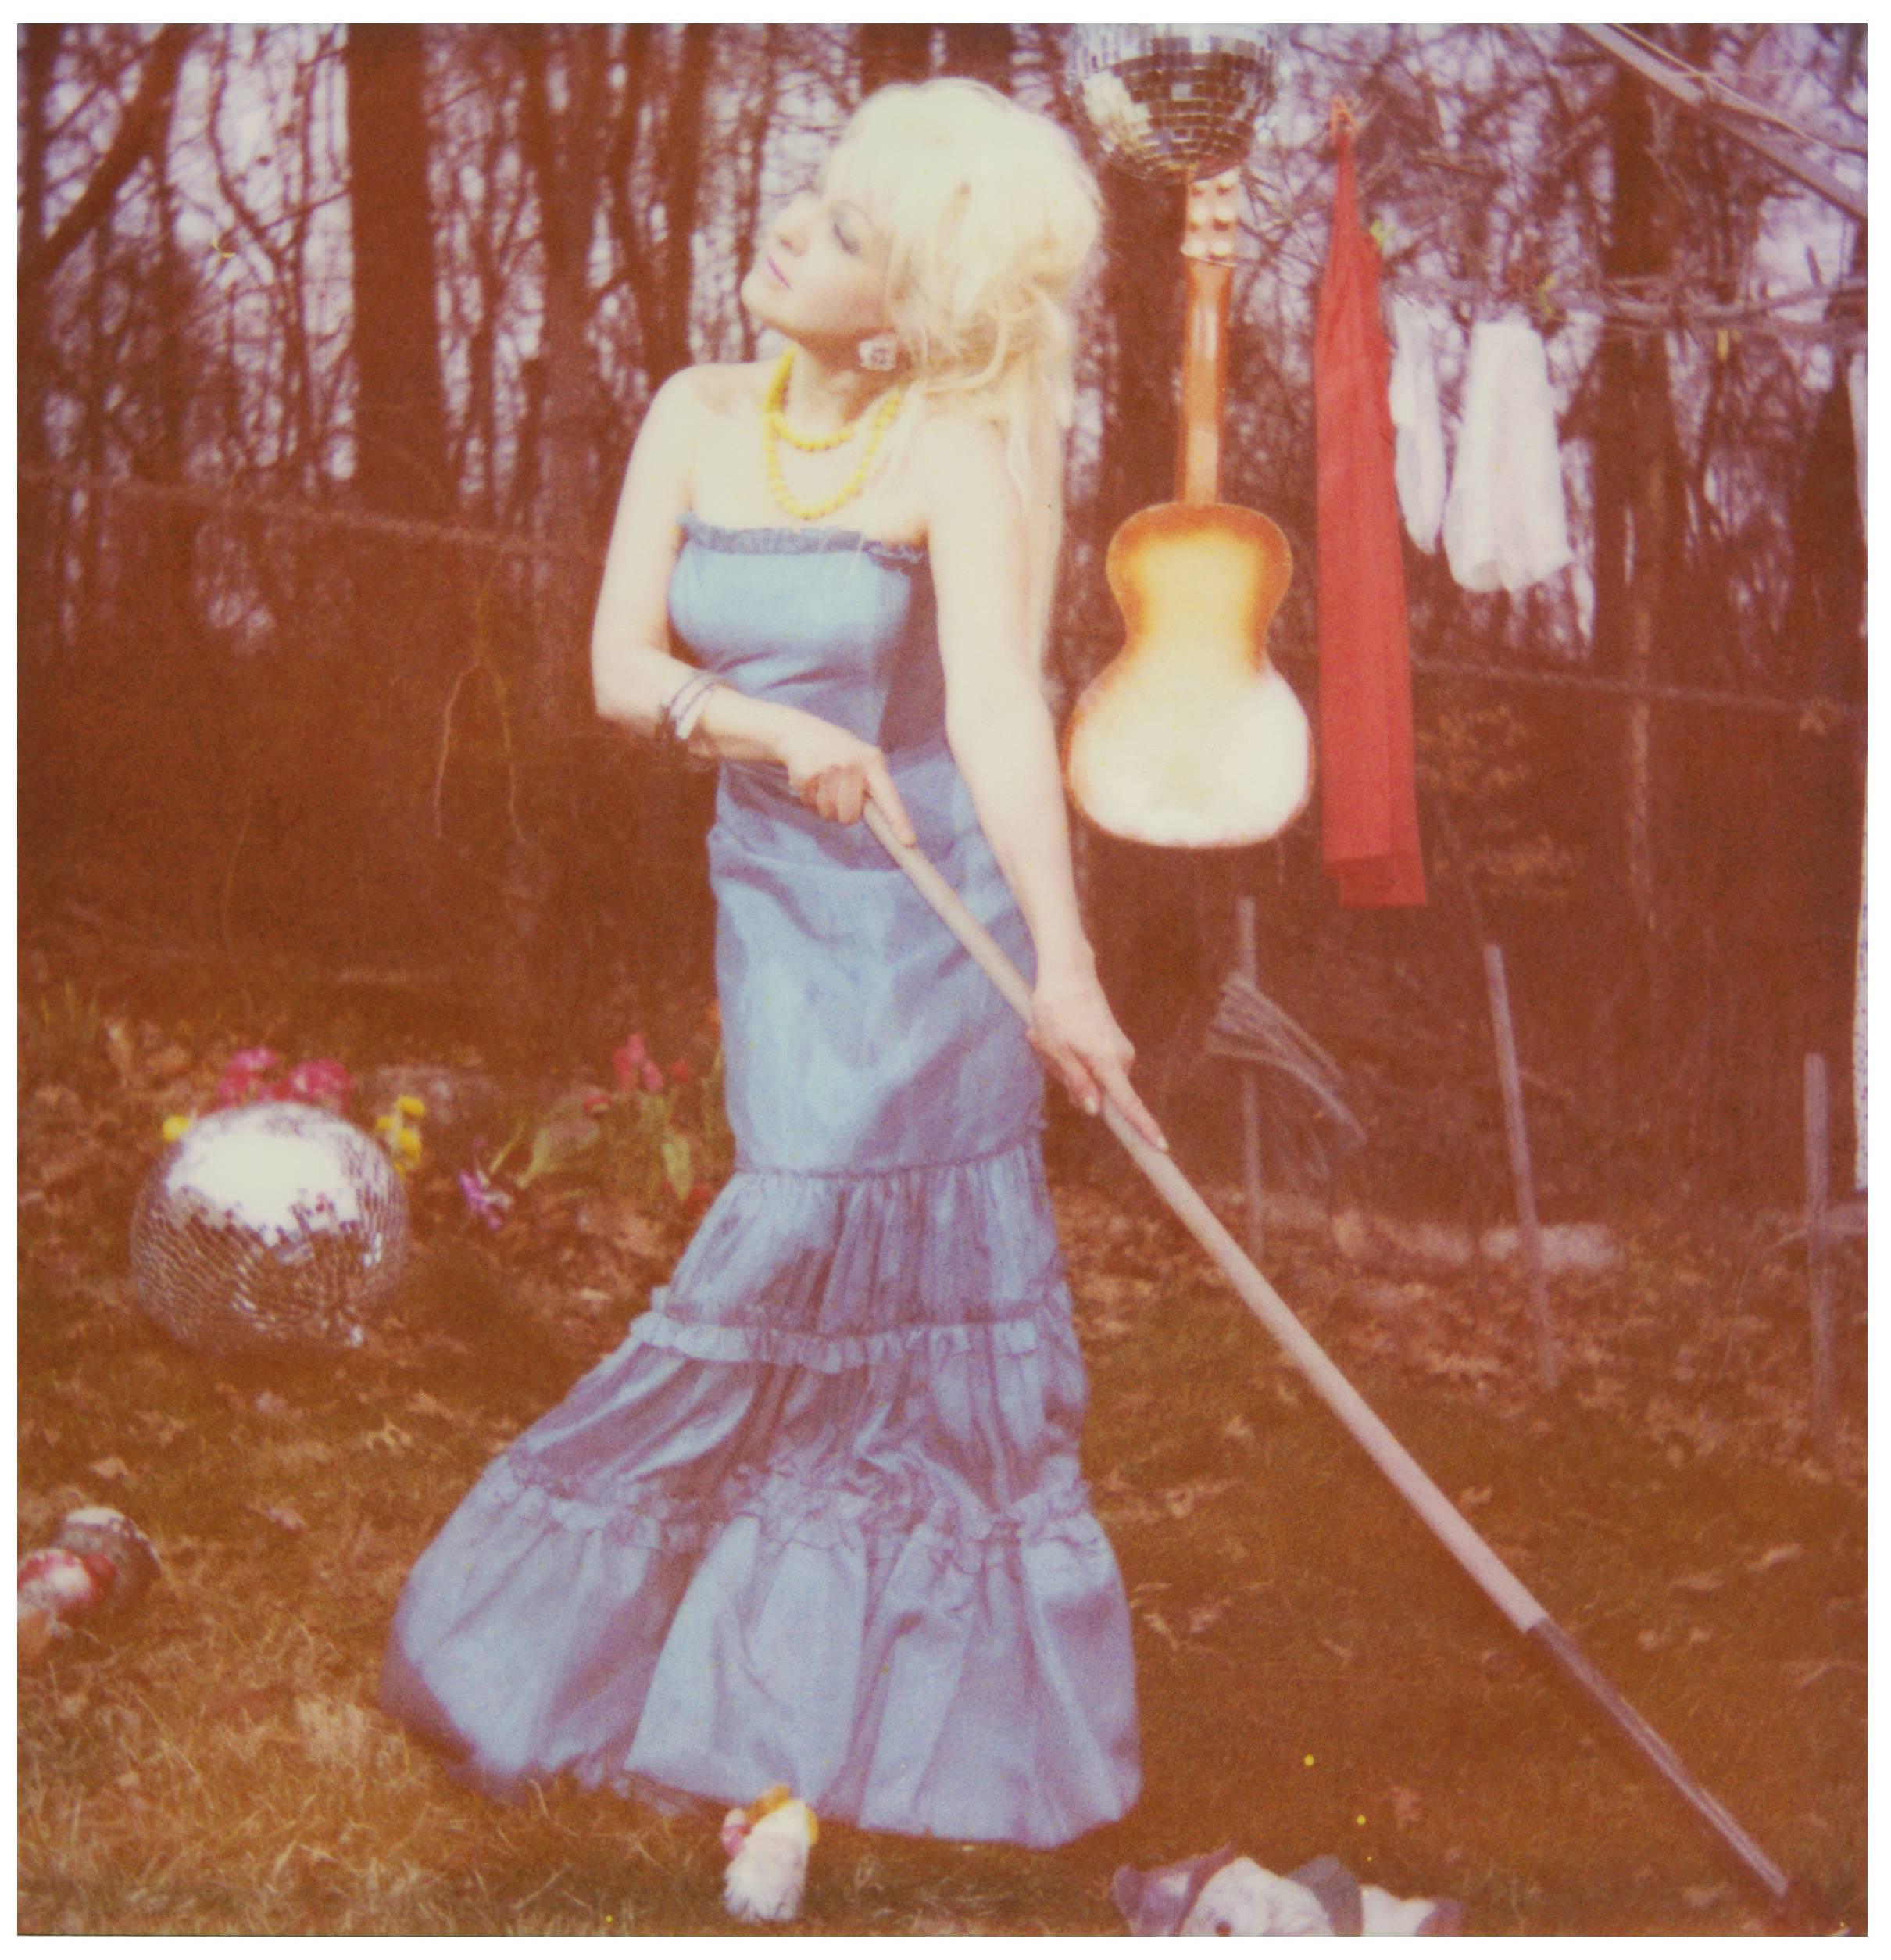 Stefanie Schneider Color Photograph -  "Traces of Tears" (Cyndi Lauper) - record cover shoot